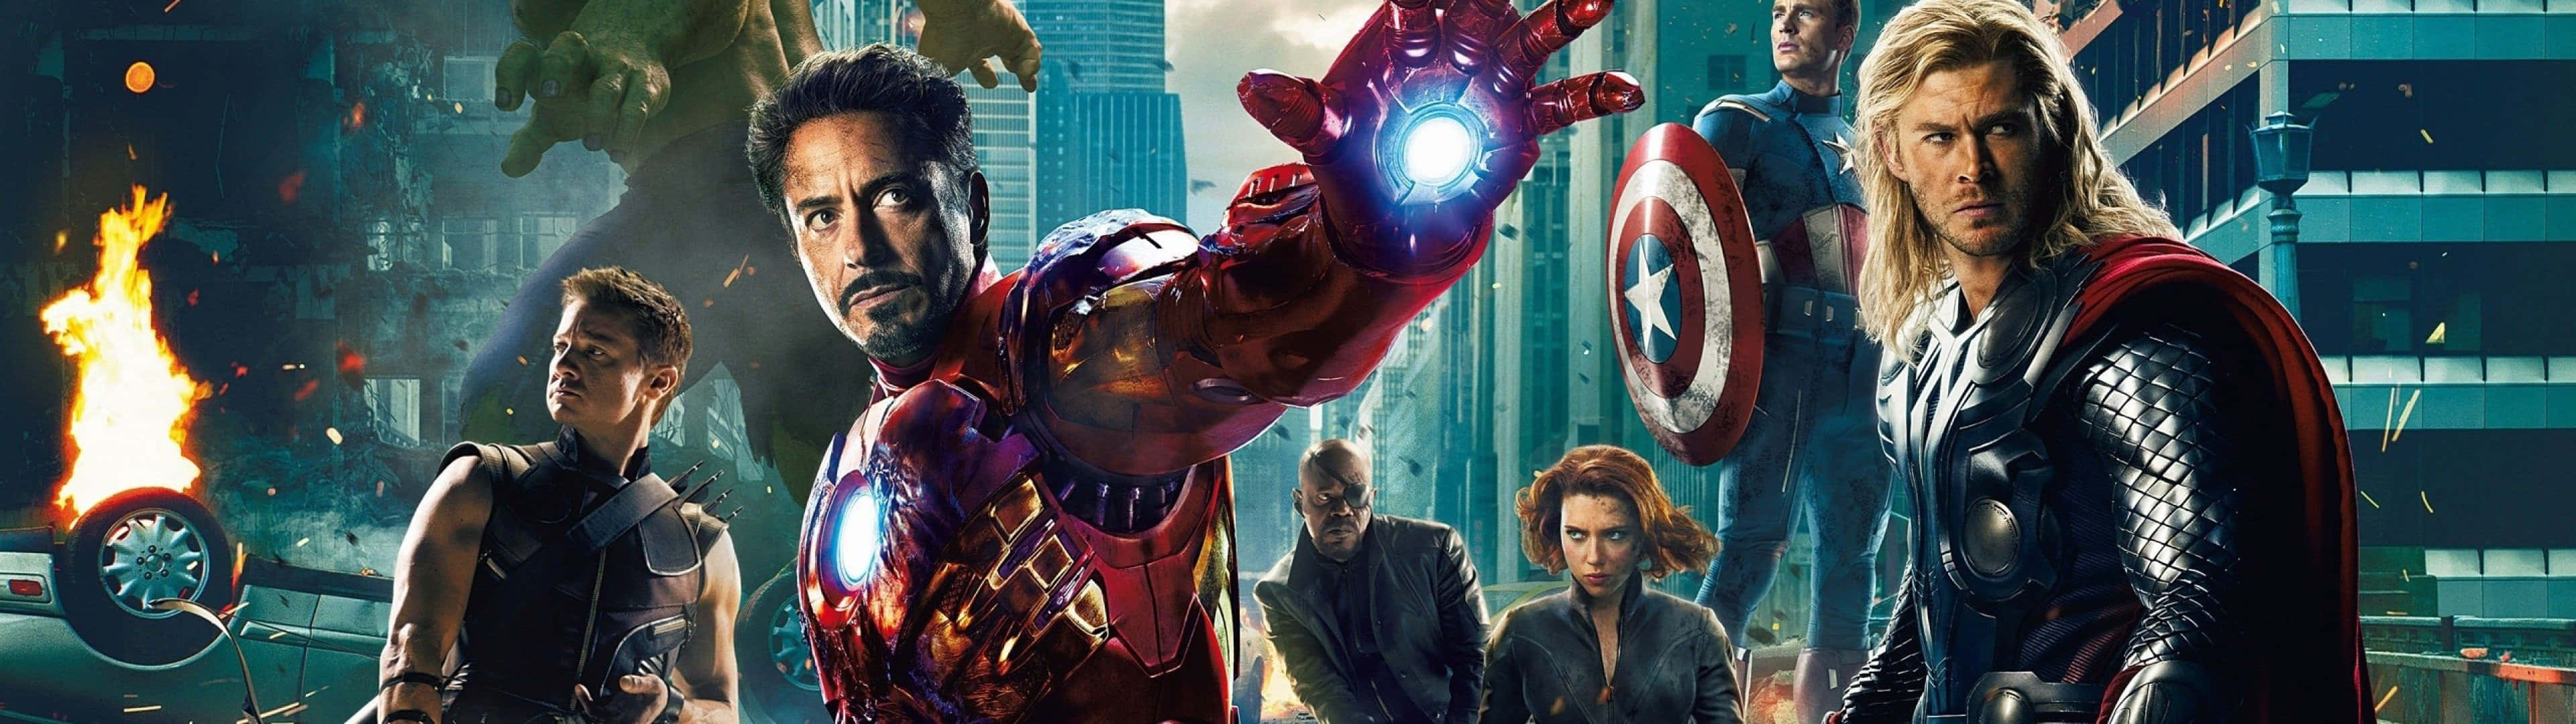 Get Ready For An Epic Action Adventure with Marvel's Avengers in Dual Screen Mode Wallpaper